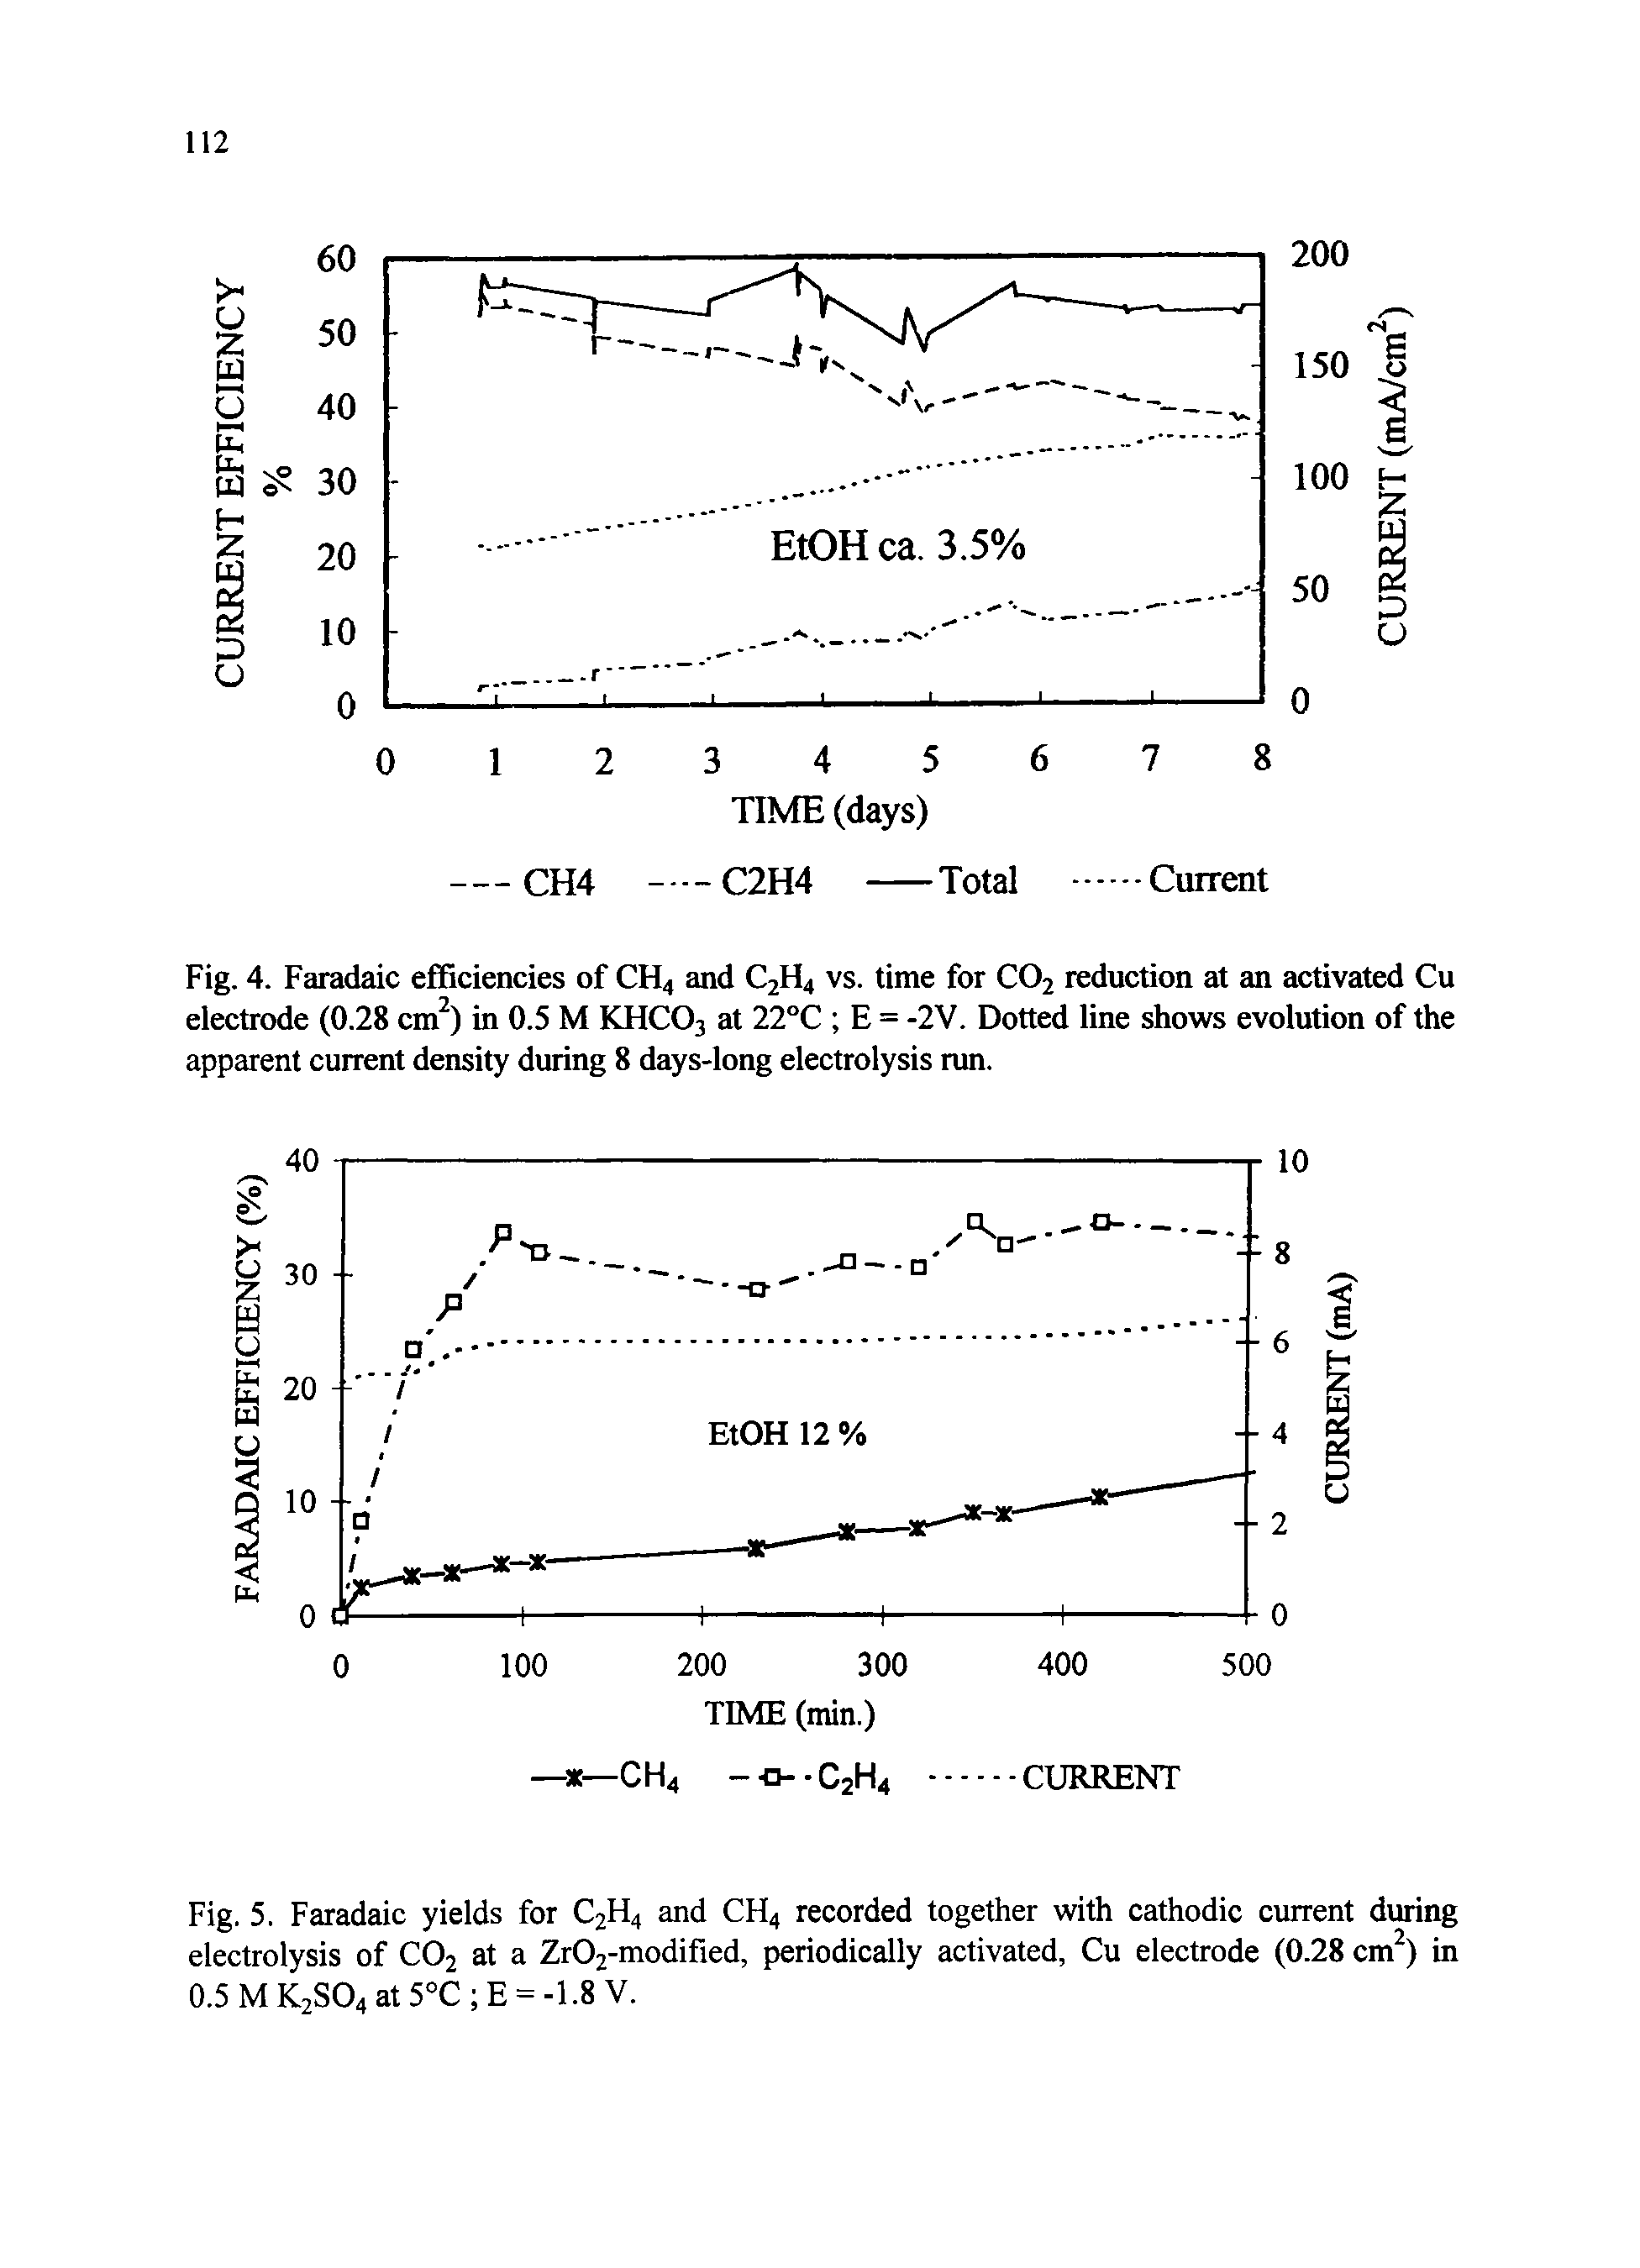 Fig. 5. Faradaic yields for C2H4 and CH4 recorded together with cathodic current during electrolysis of CO2 at a Zr02-modified, periodically activated, Cu electrode (0.28 cm ) in 0.5MK2SO4at5°C E = -1.8 V.